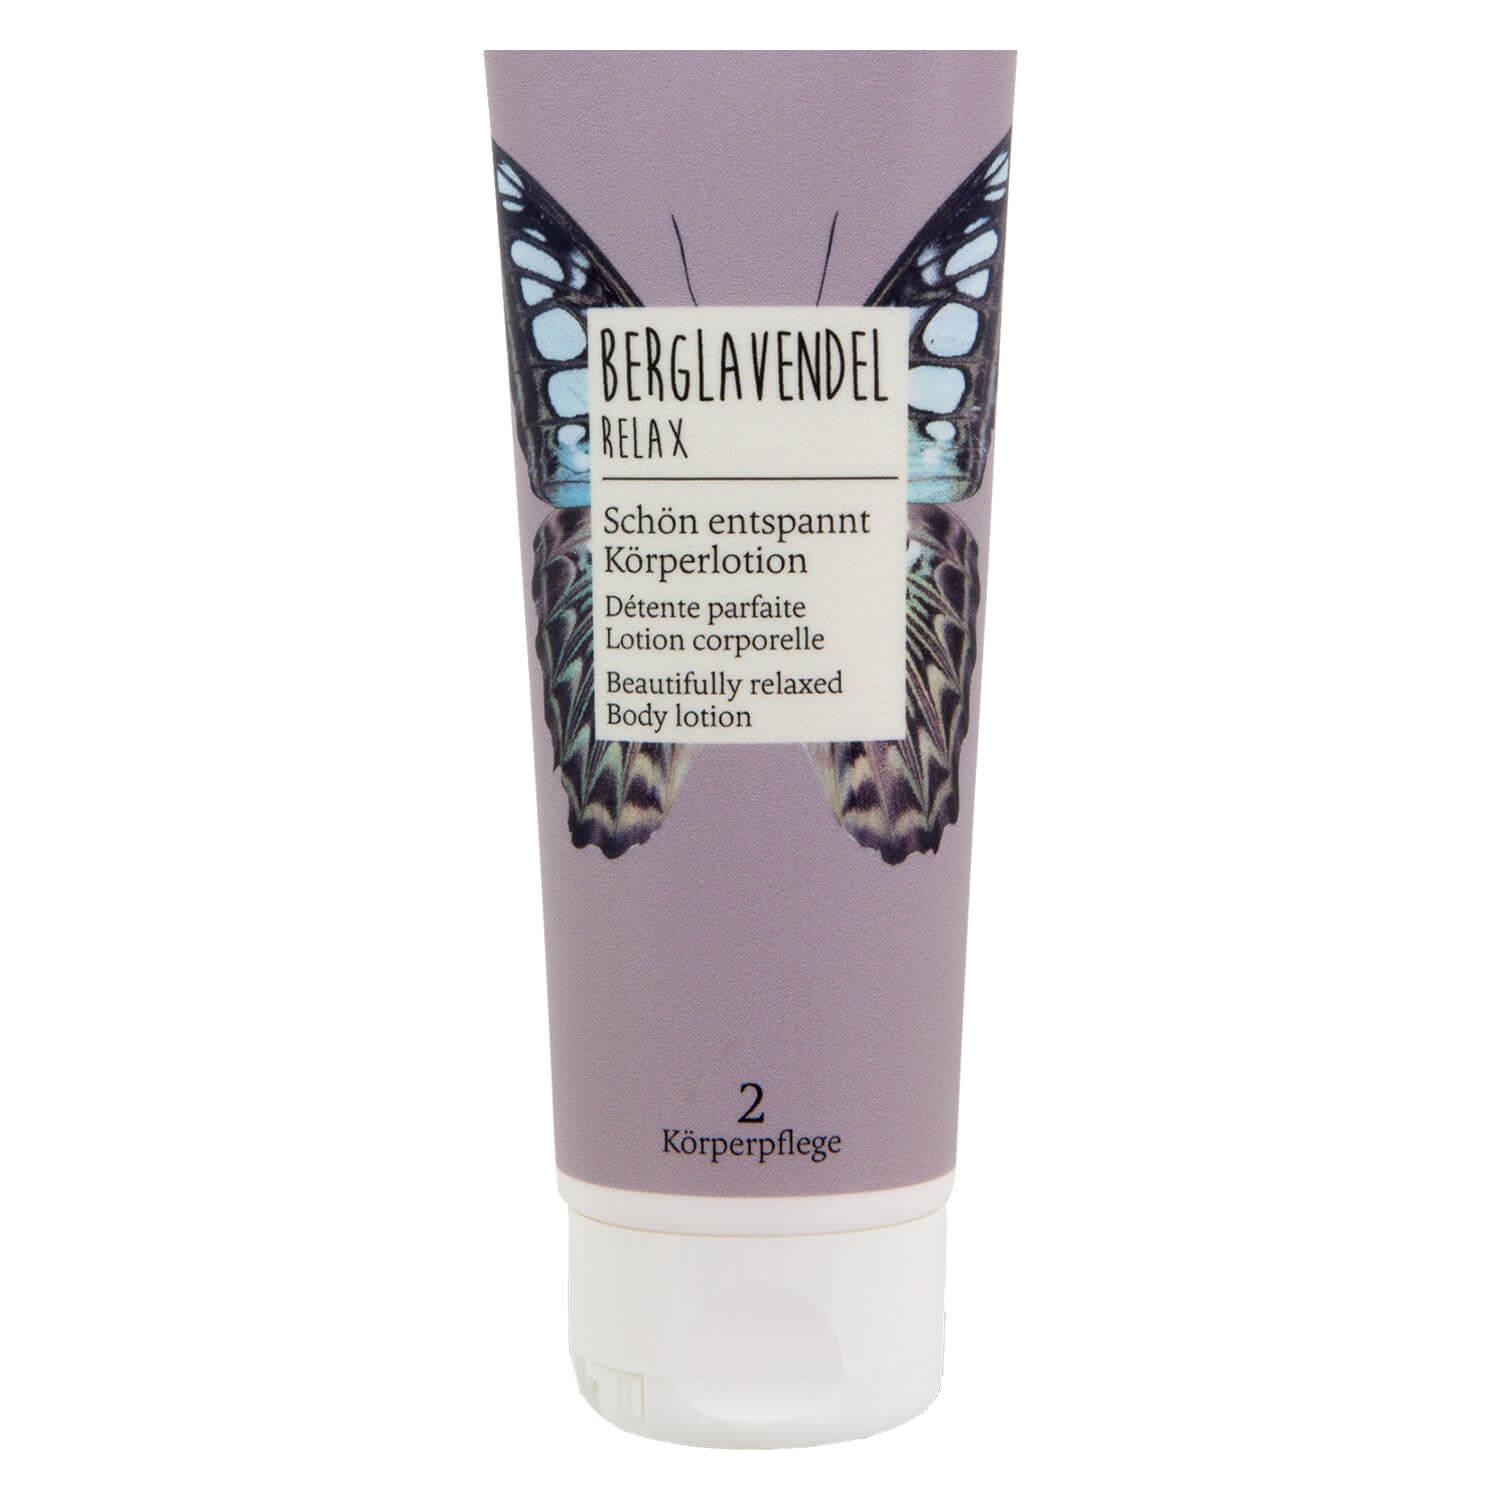 Berglavendel Relax - Beautifully relaxed body lotion